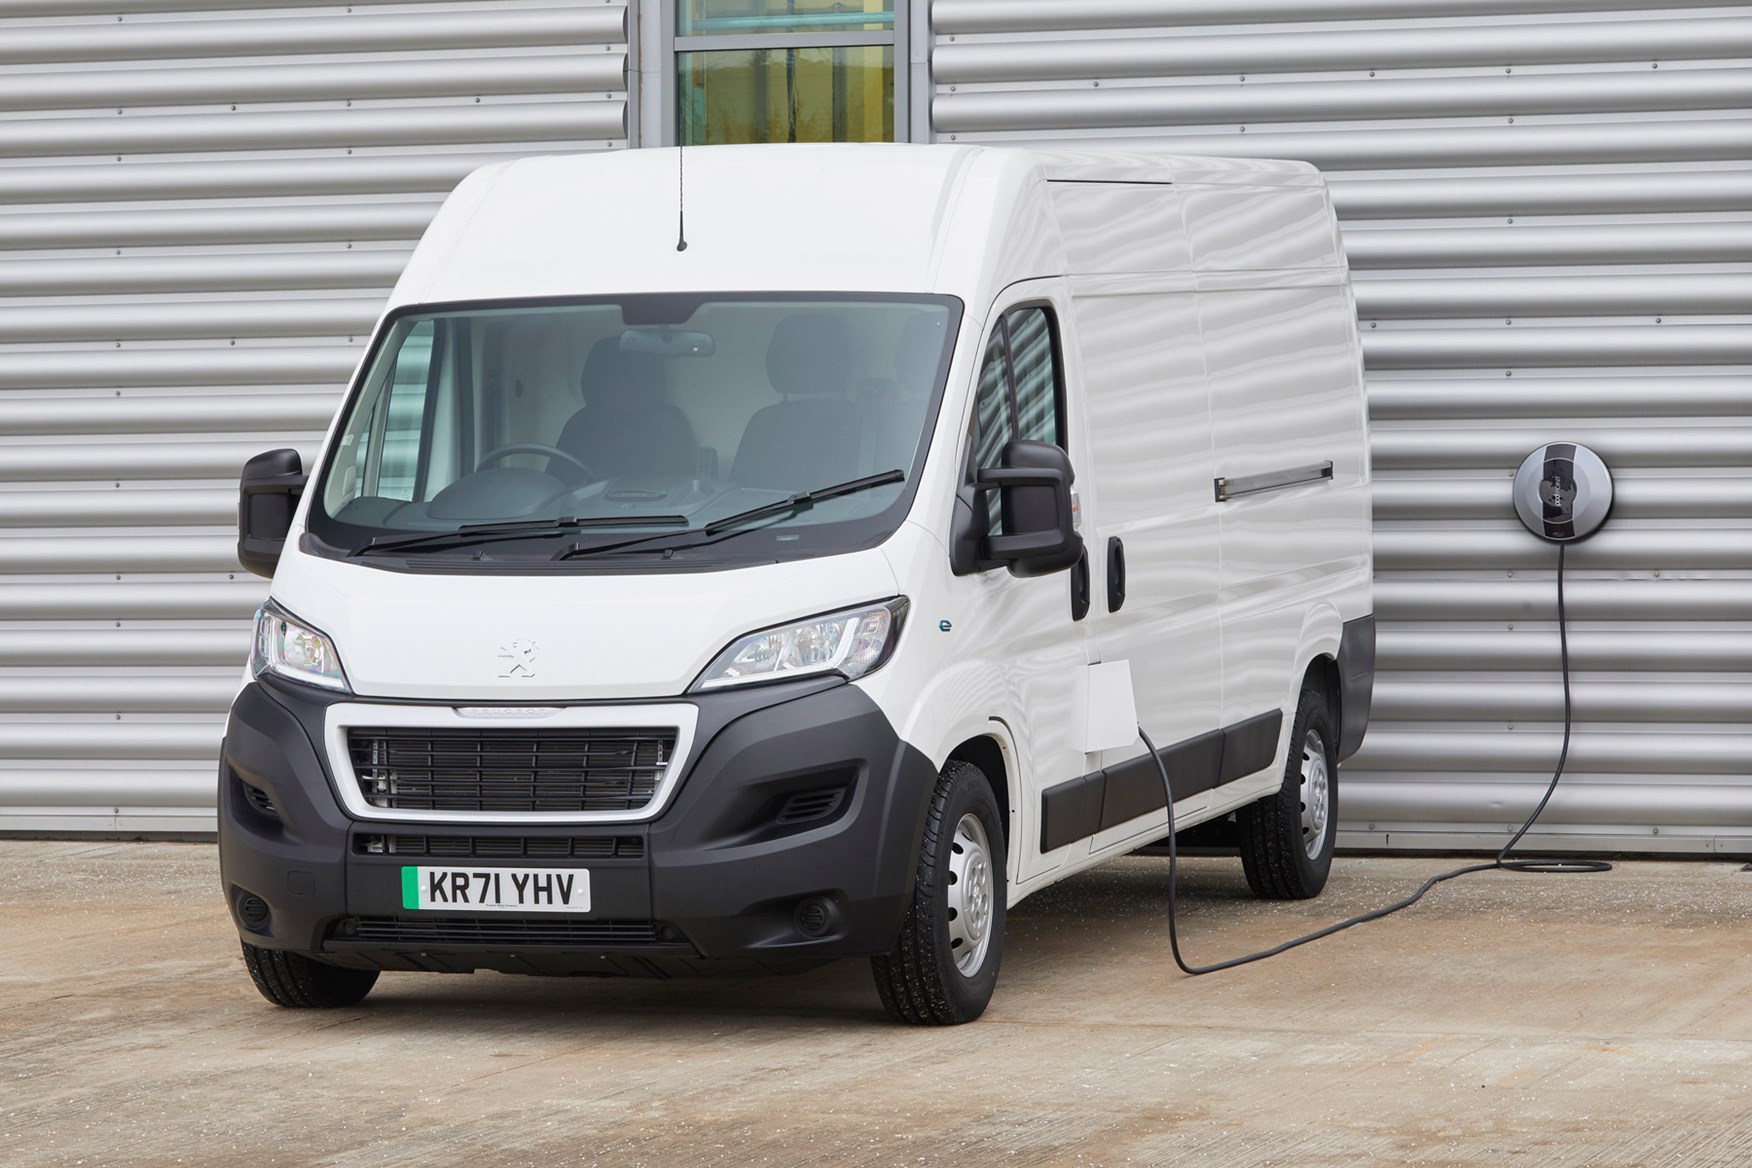 Peugeot e-Boxer electric van review - front view, plugged in charging